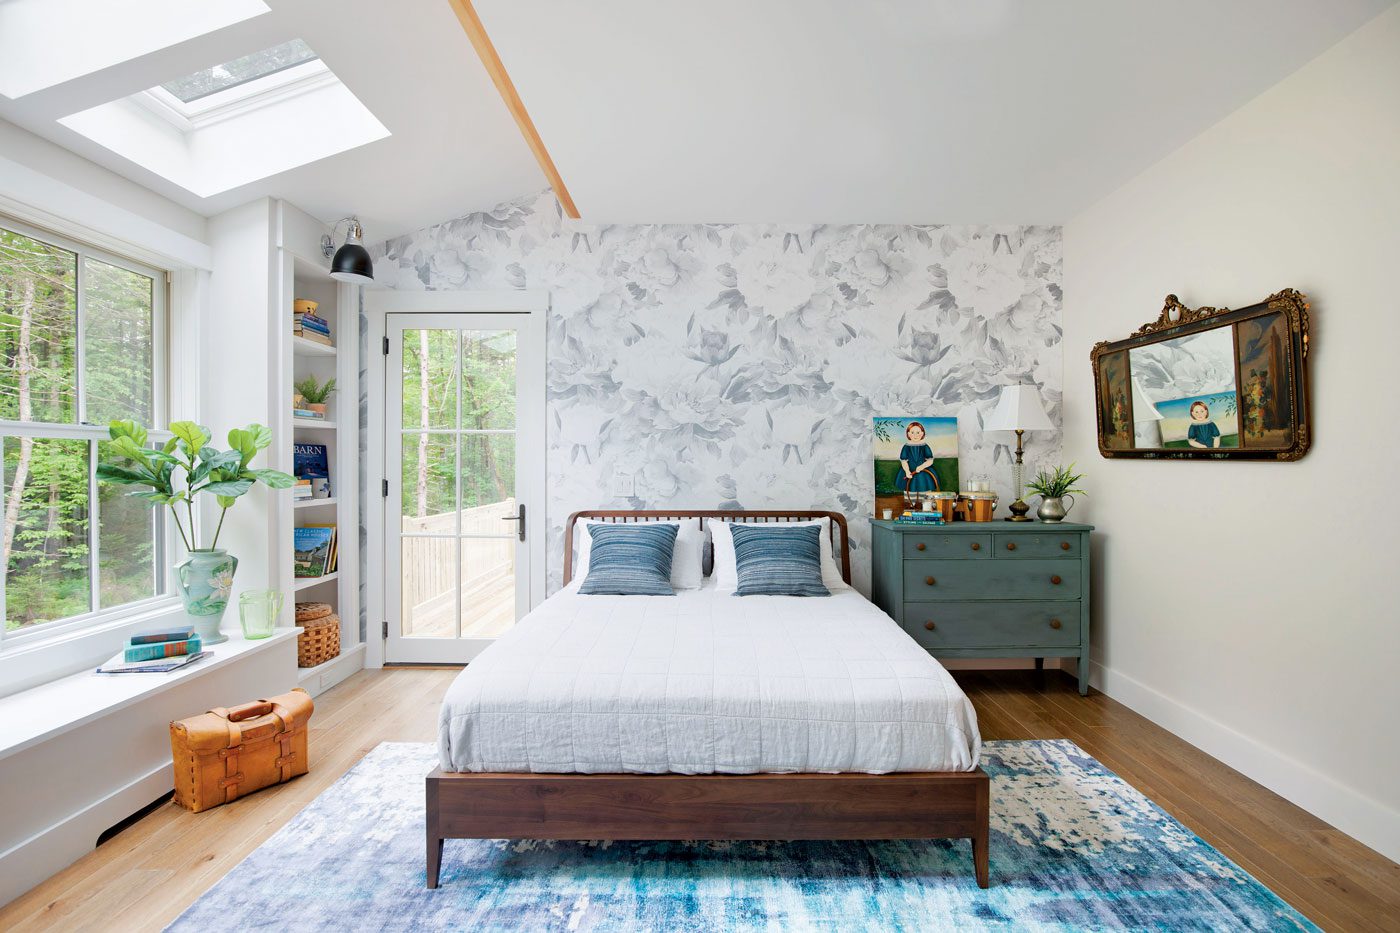 This farm-cottage bedroom shows off the comforts of home with a white comforter, peel-away gray patterned wallpaper and plenty of windows for natural light.